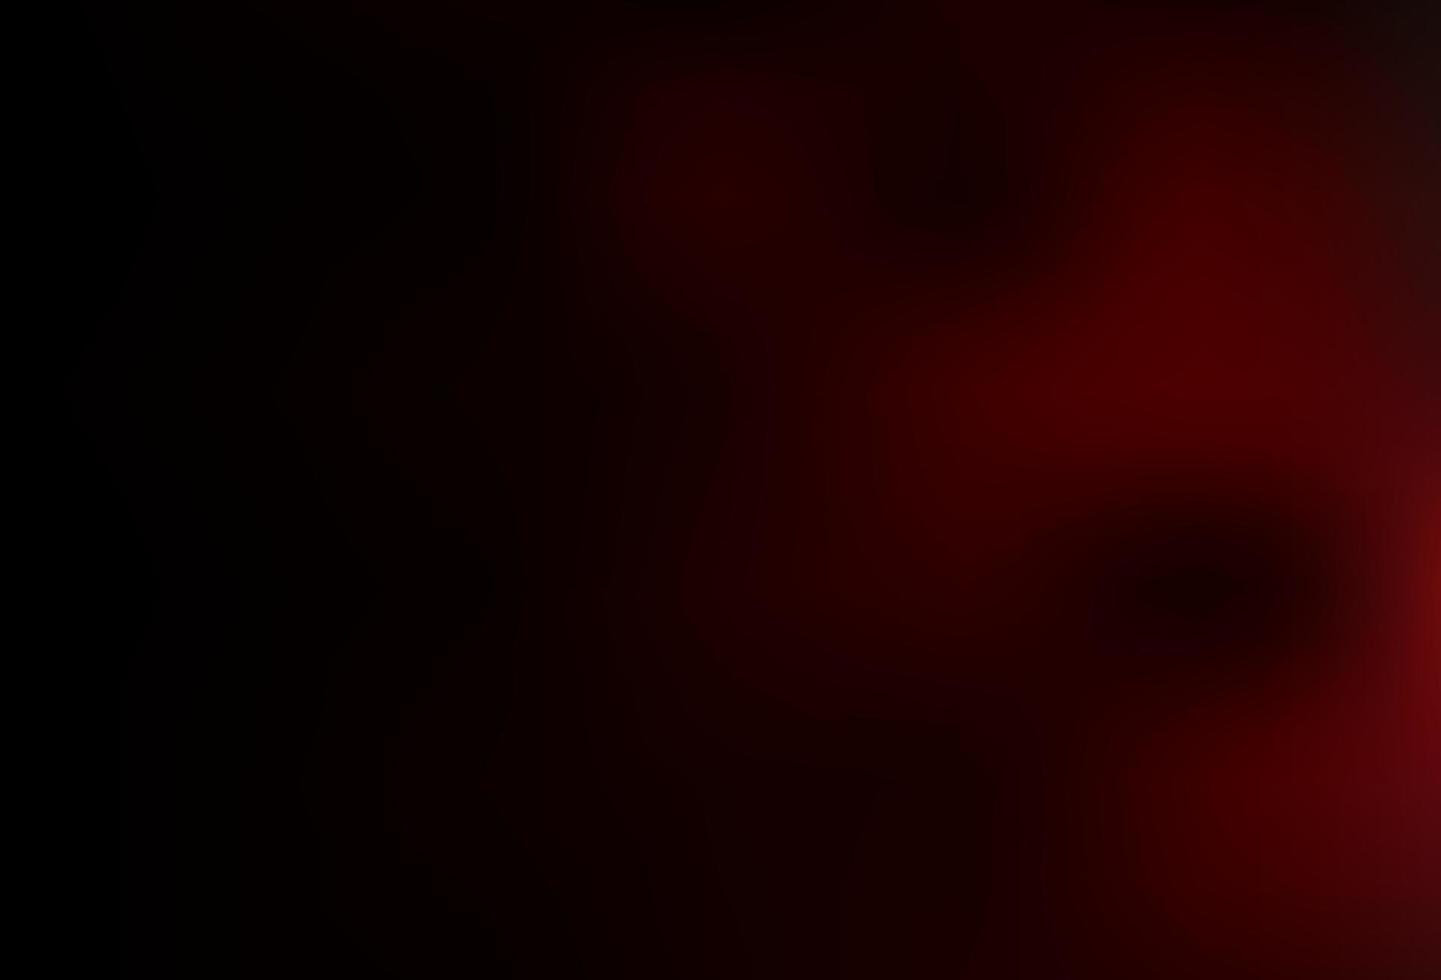 Dark Red vector abstract blurred background.